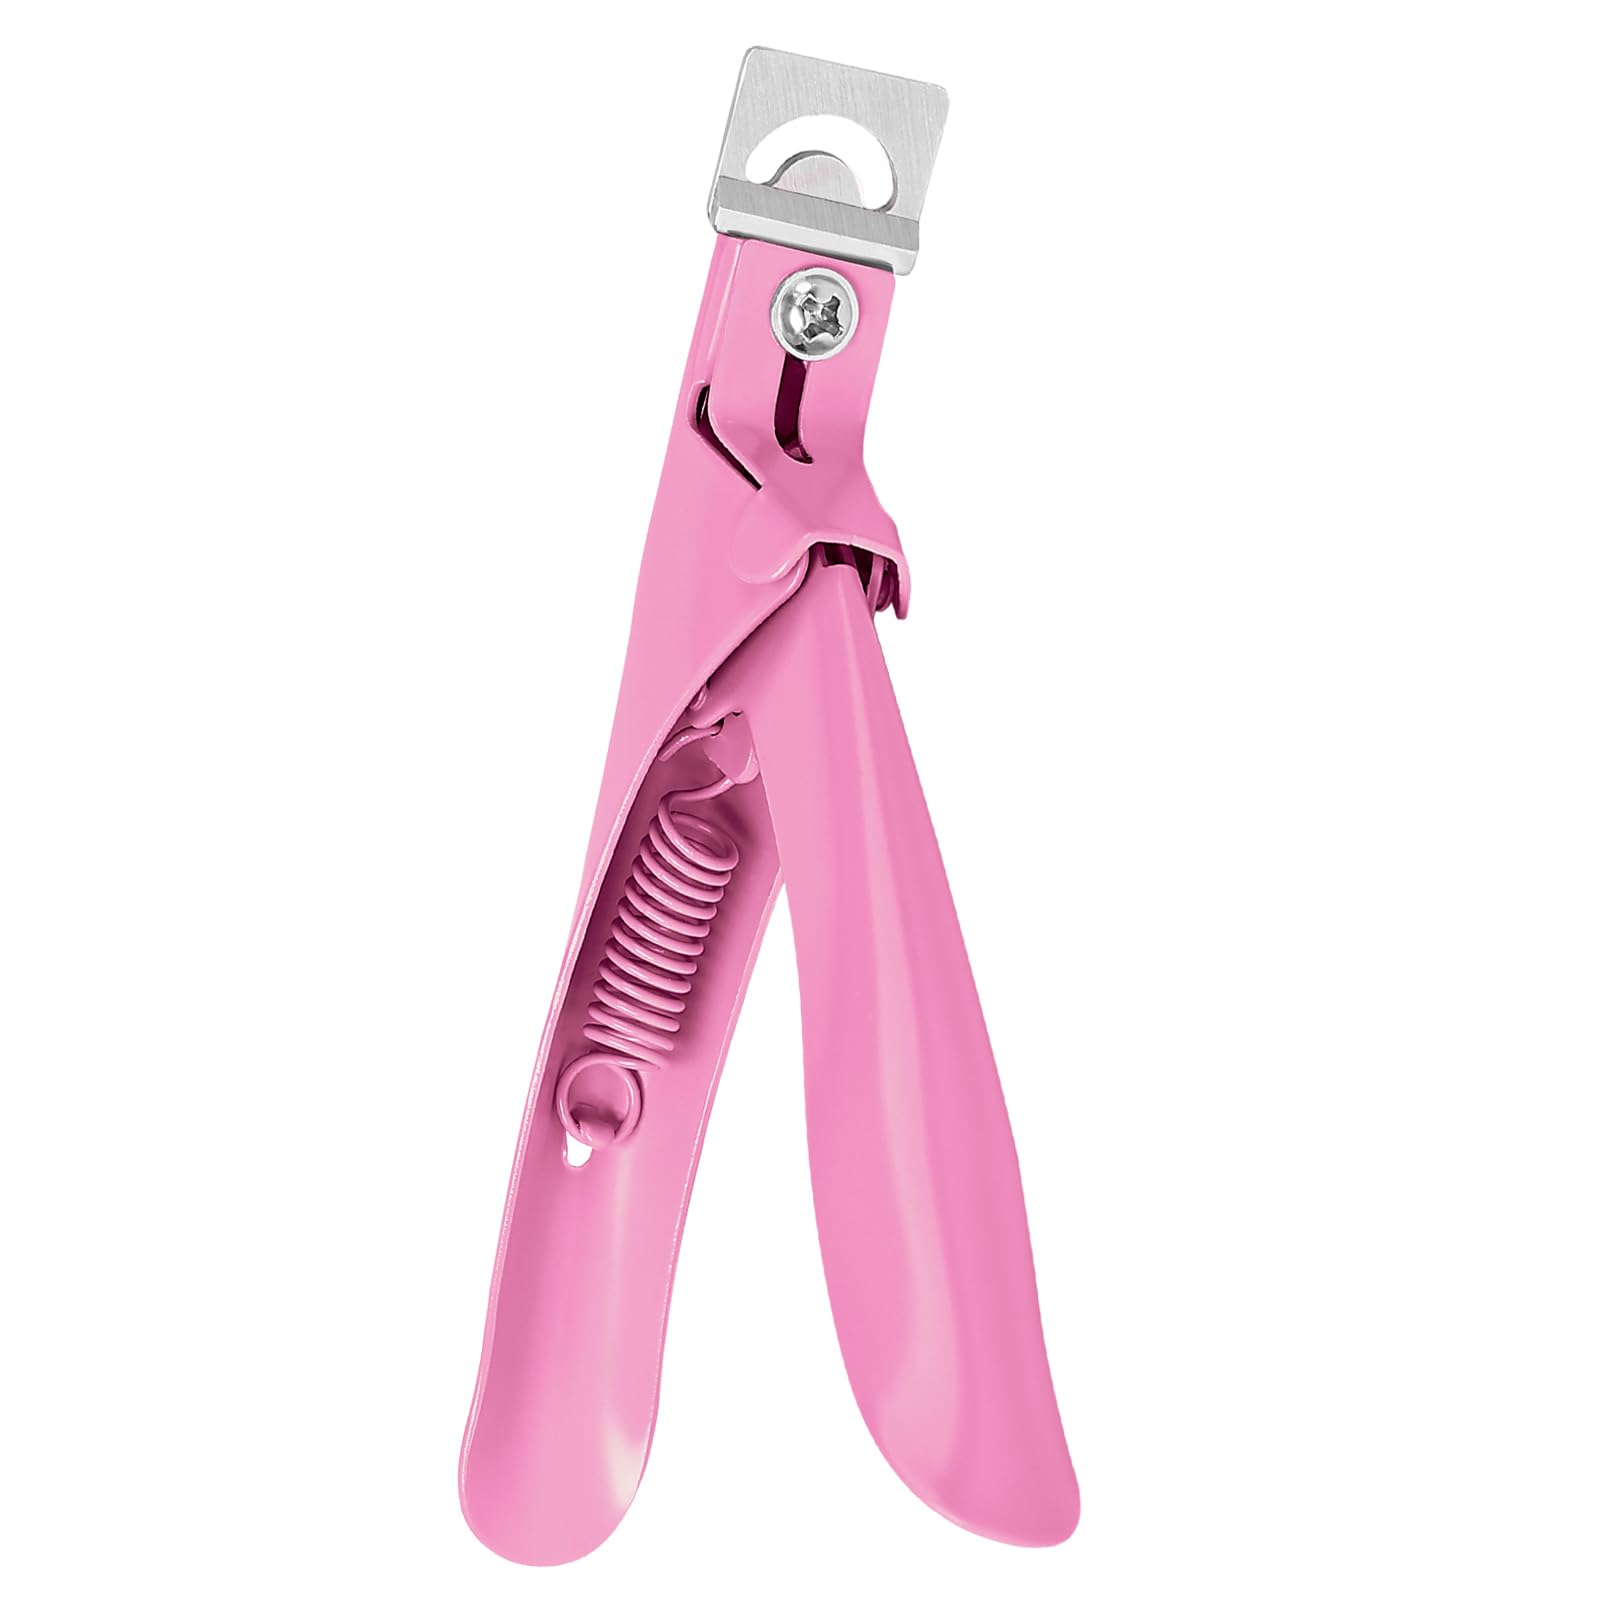 Vega Nail Clipper (Nail Cutter) Price - Buy Online at ₹140 in India